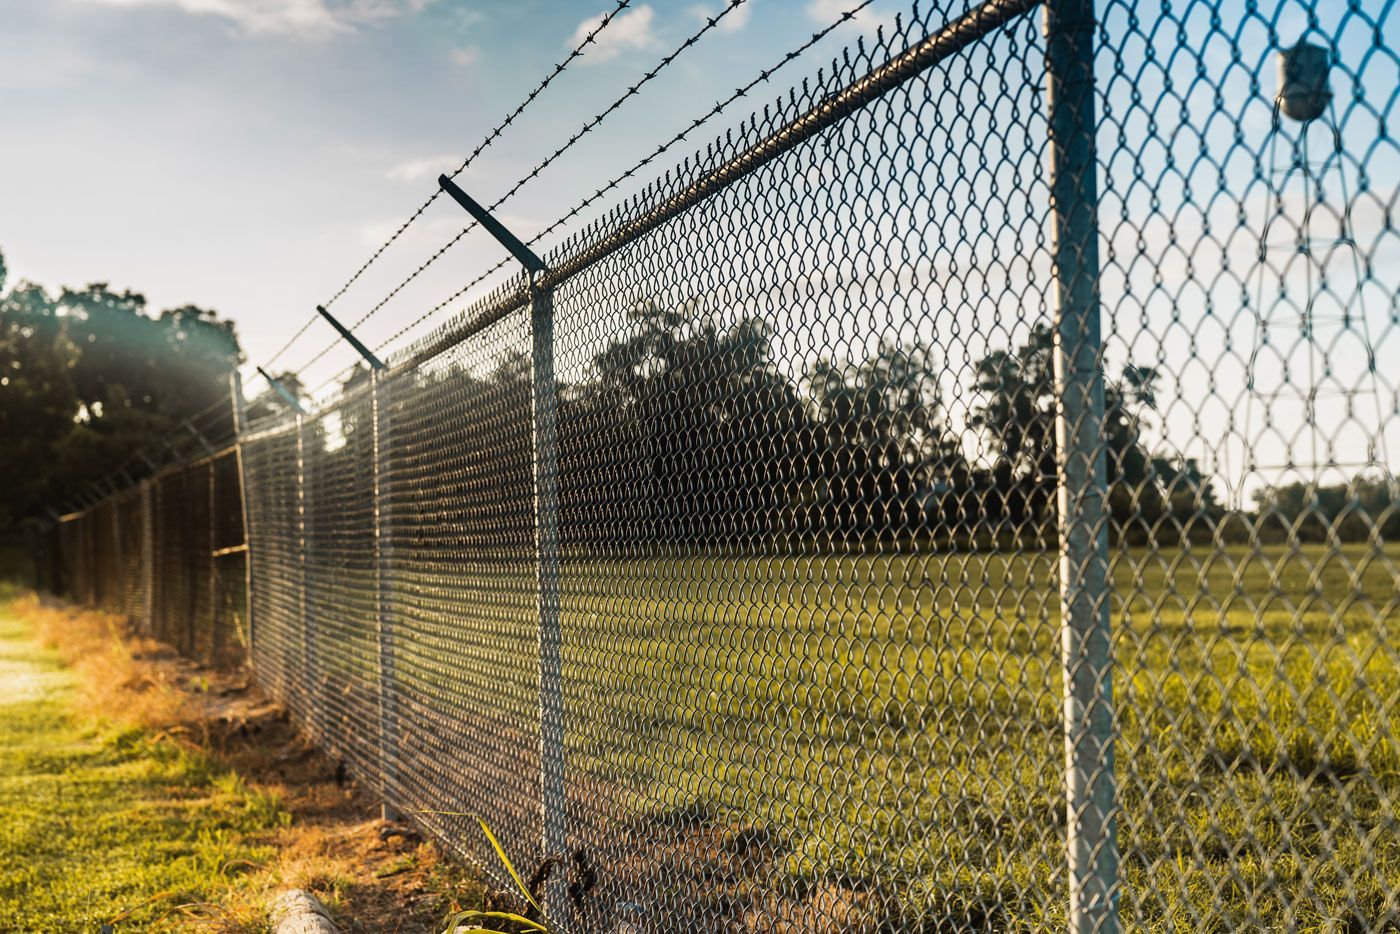 A chain link fence with barbed wire surrounding a field.